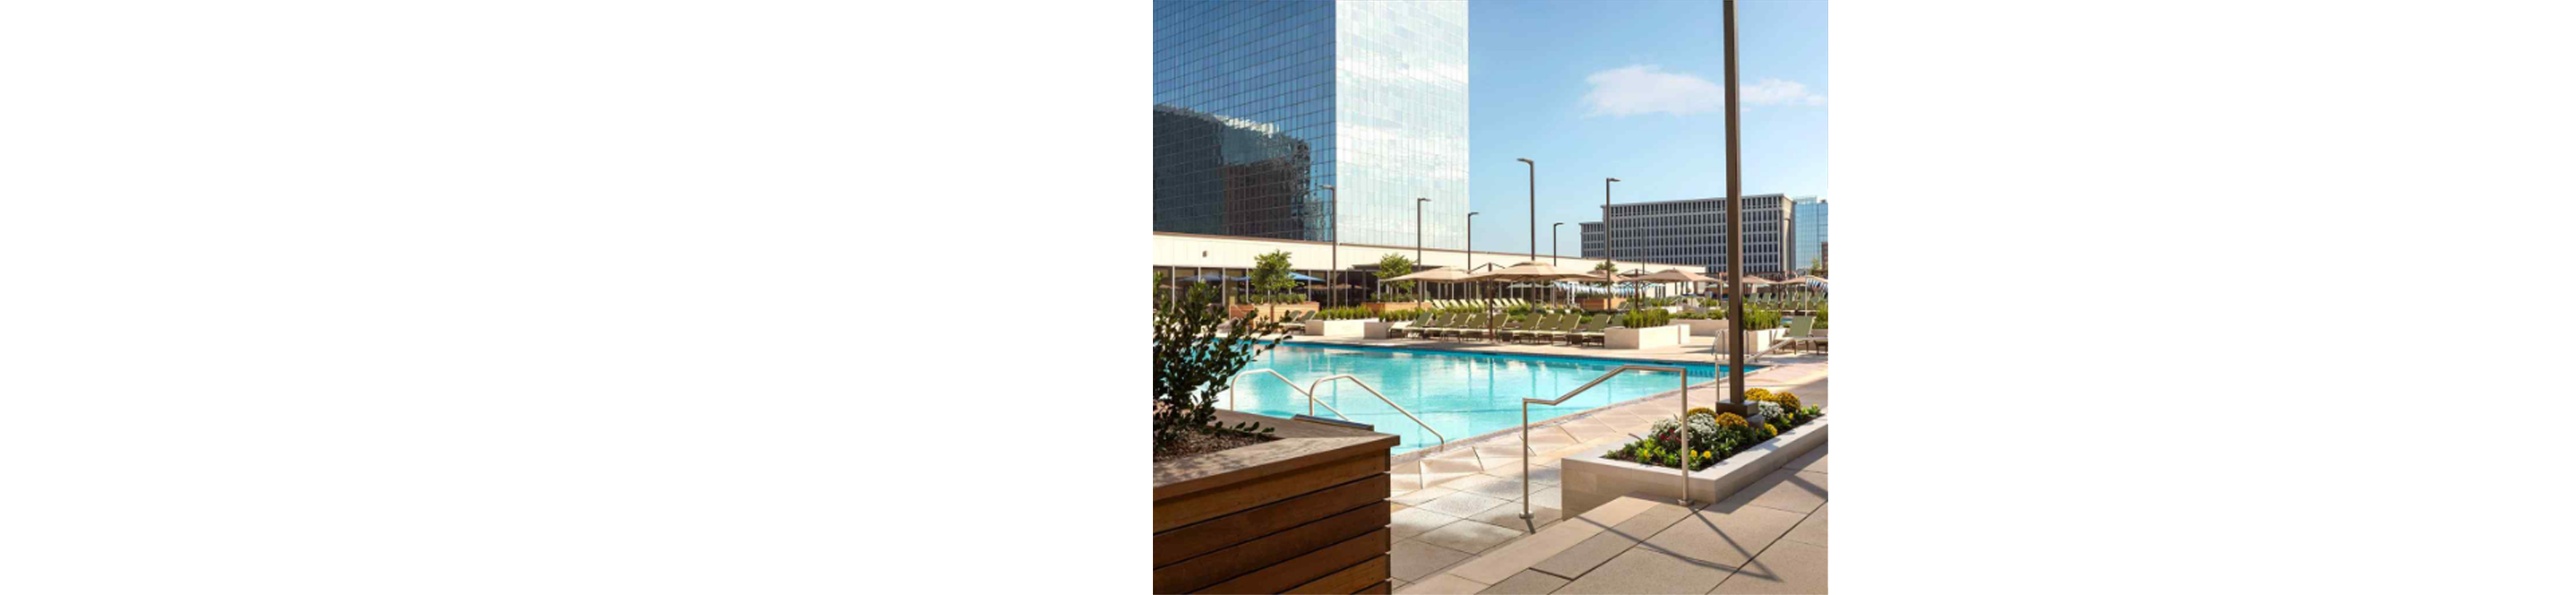 An image of a wood sauna room and an image of a roof top pool deck